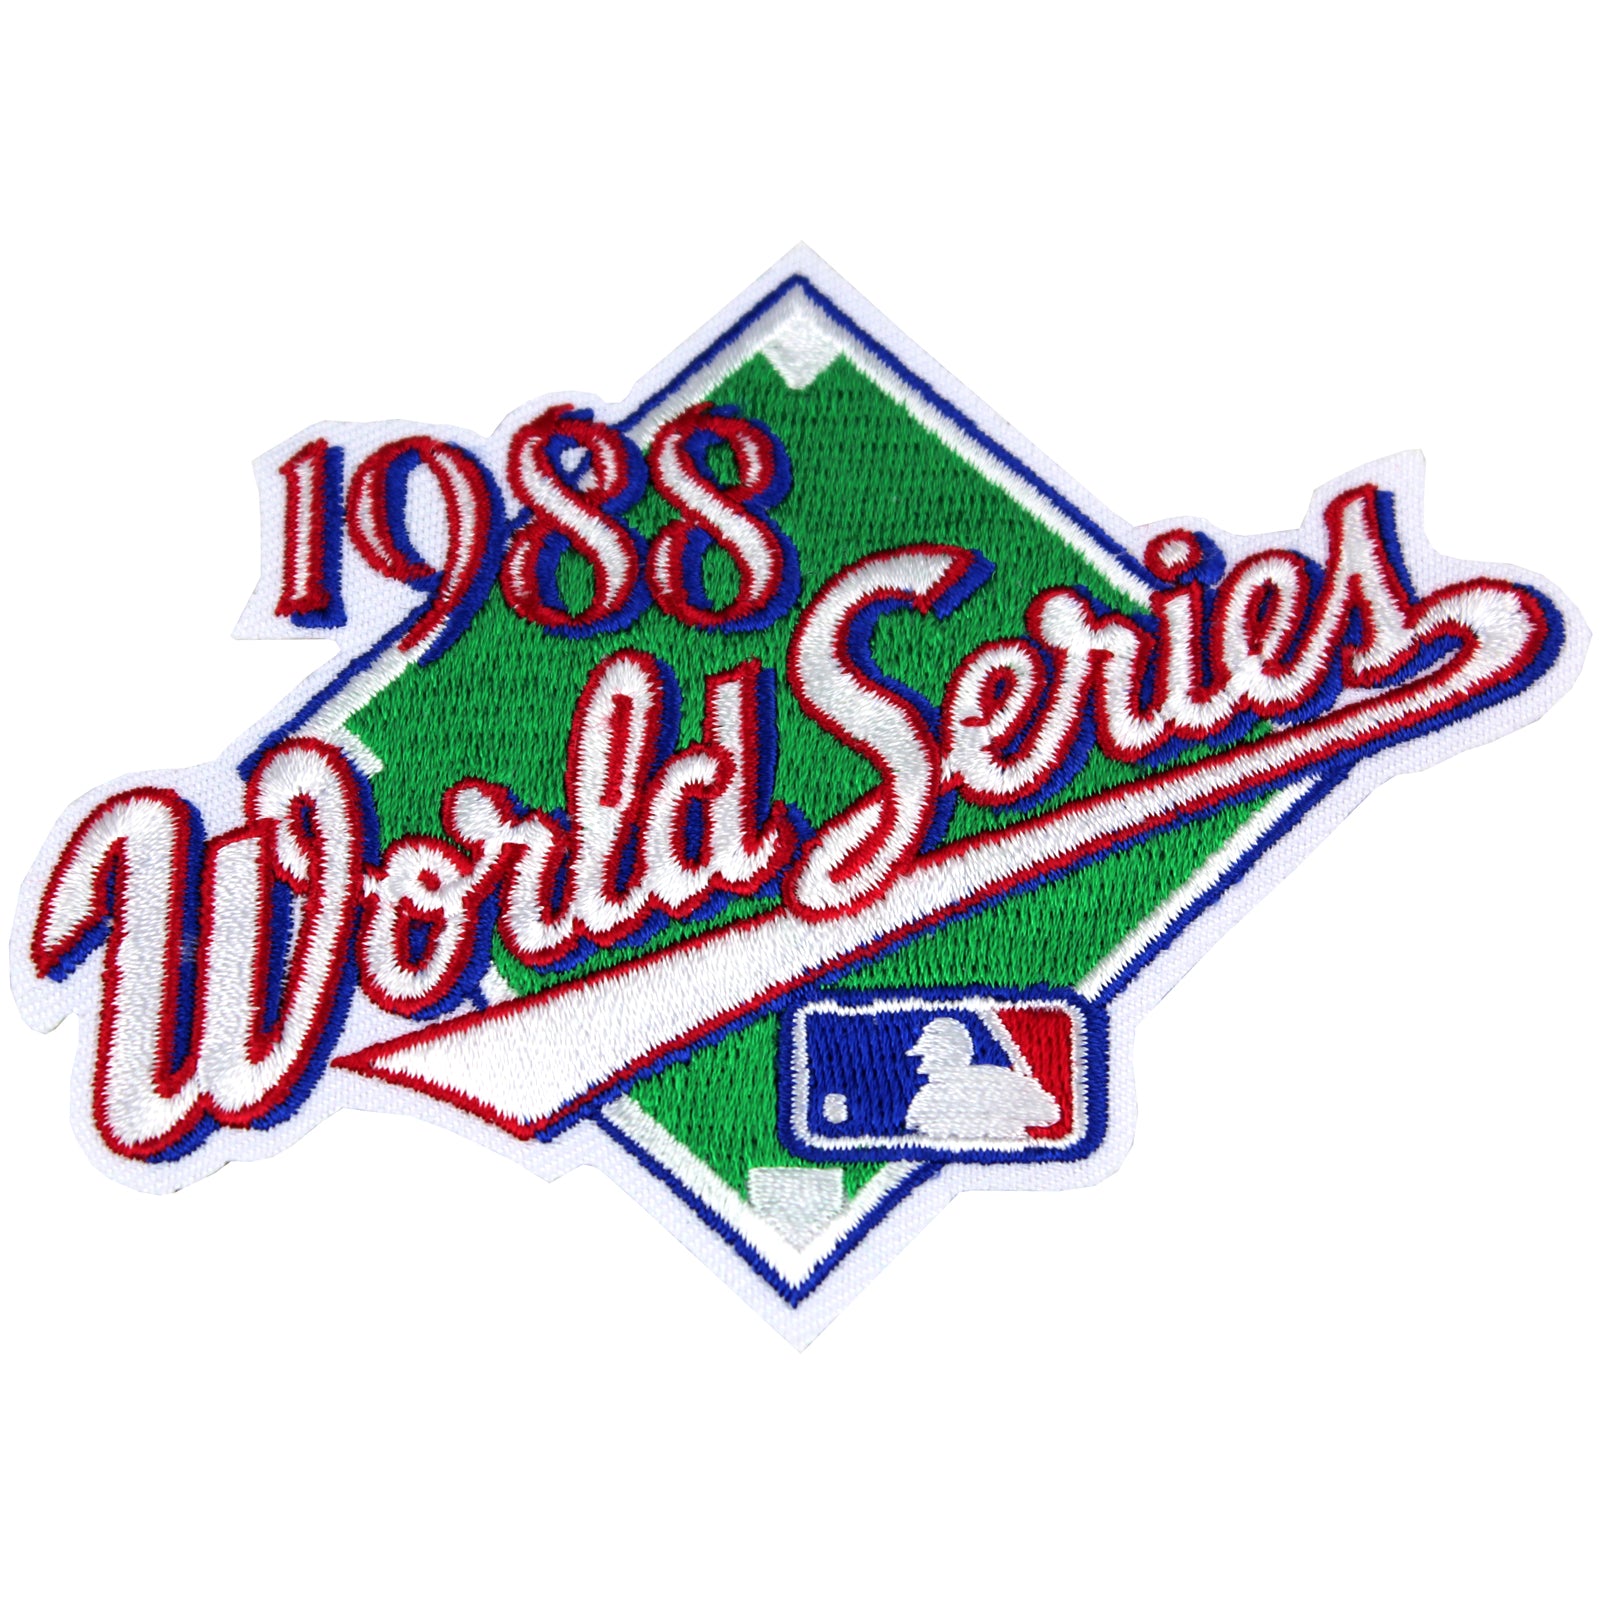 1988 World Series Patch - Los Angeles Dodgers Over Oakland As - Official MLB Licensed Emblem Source PATCHBBWS88